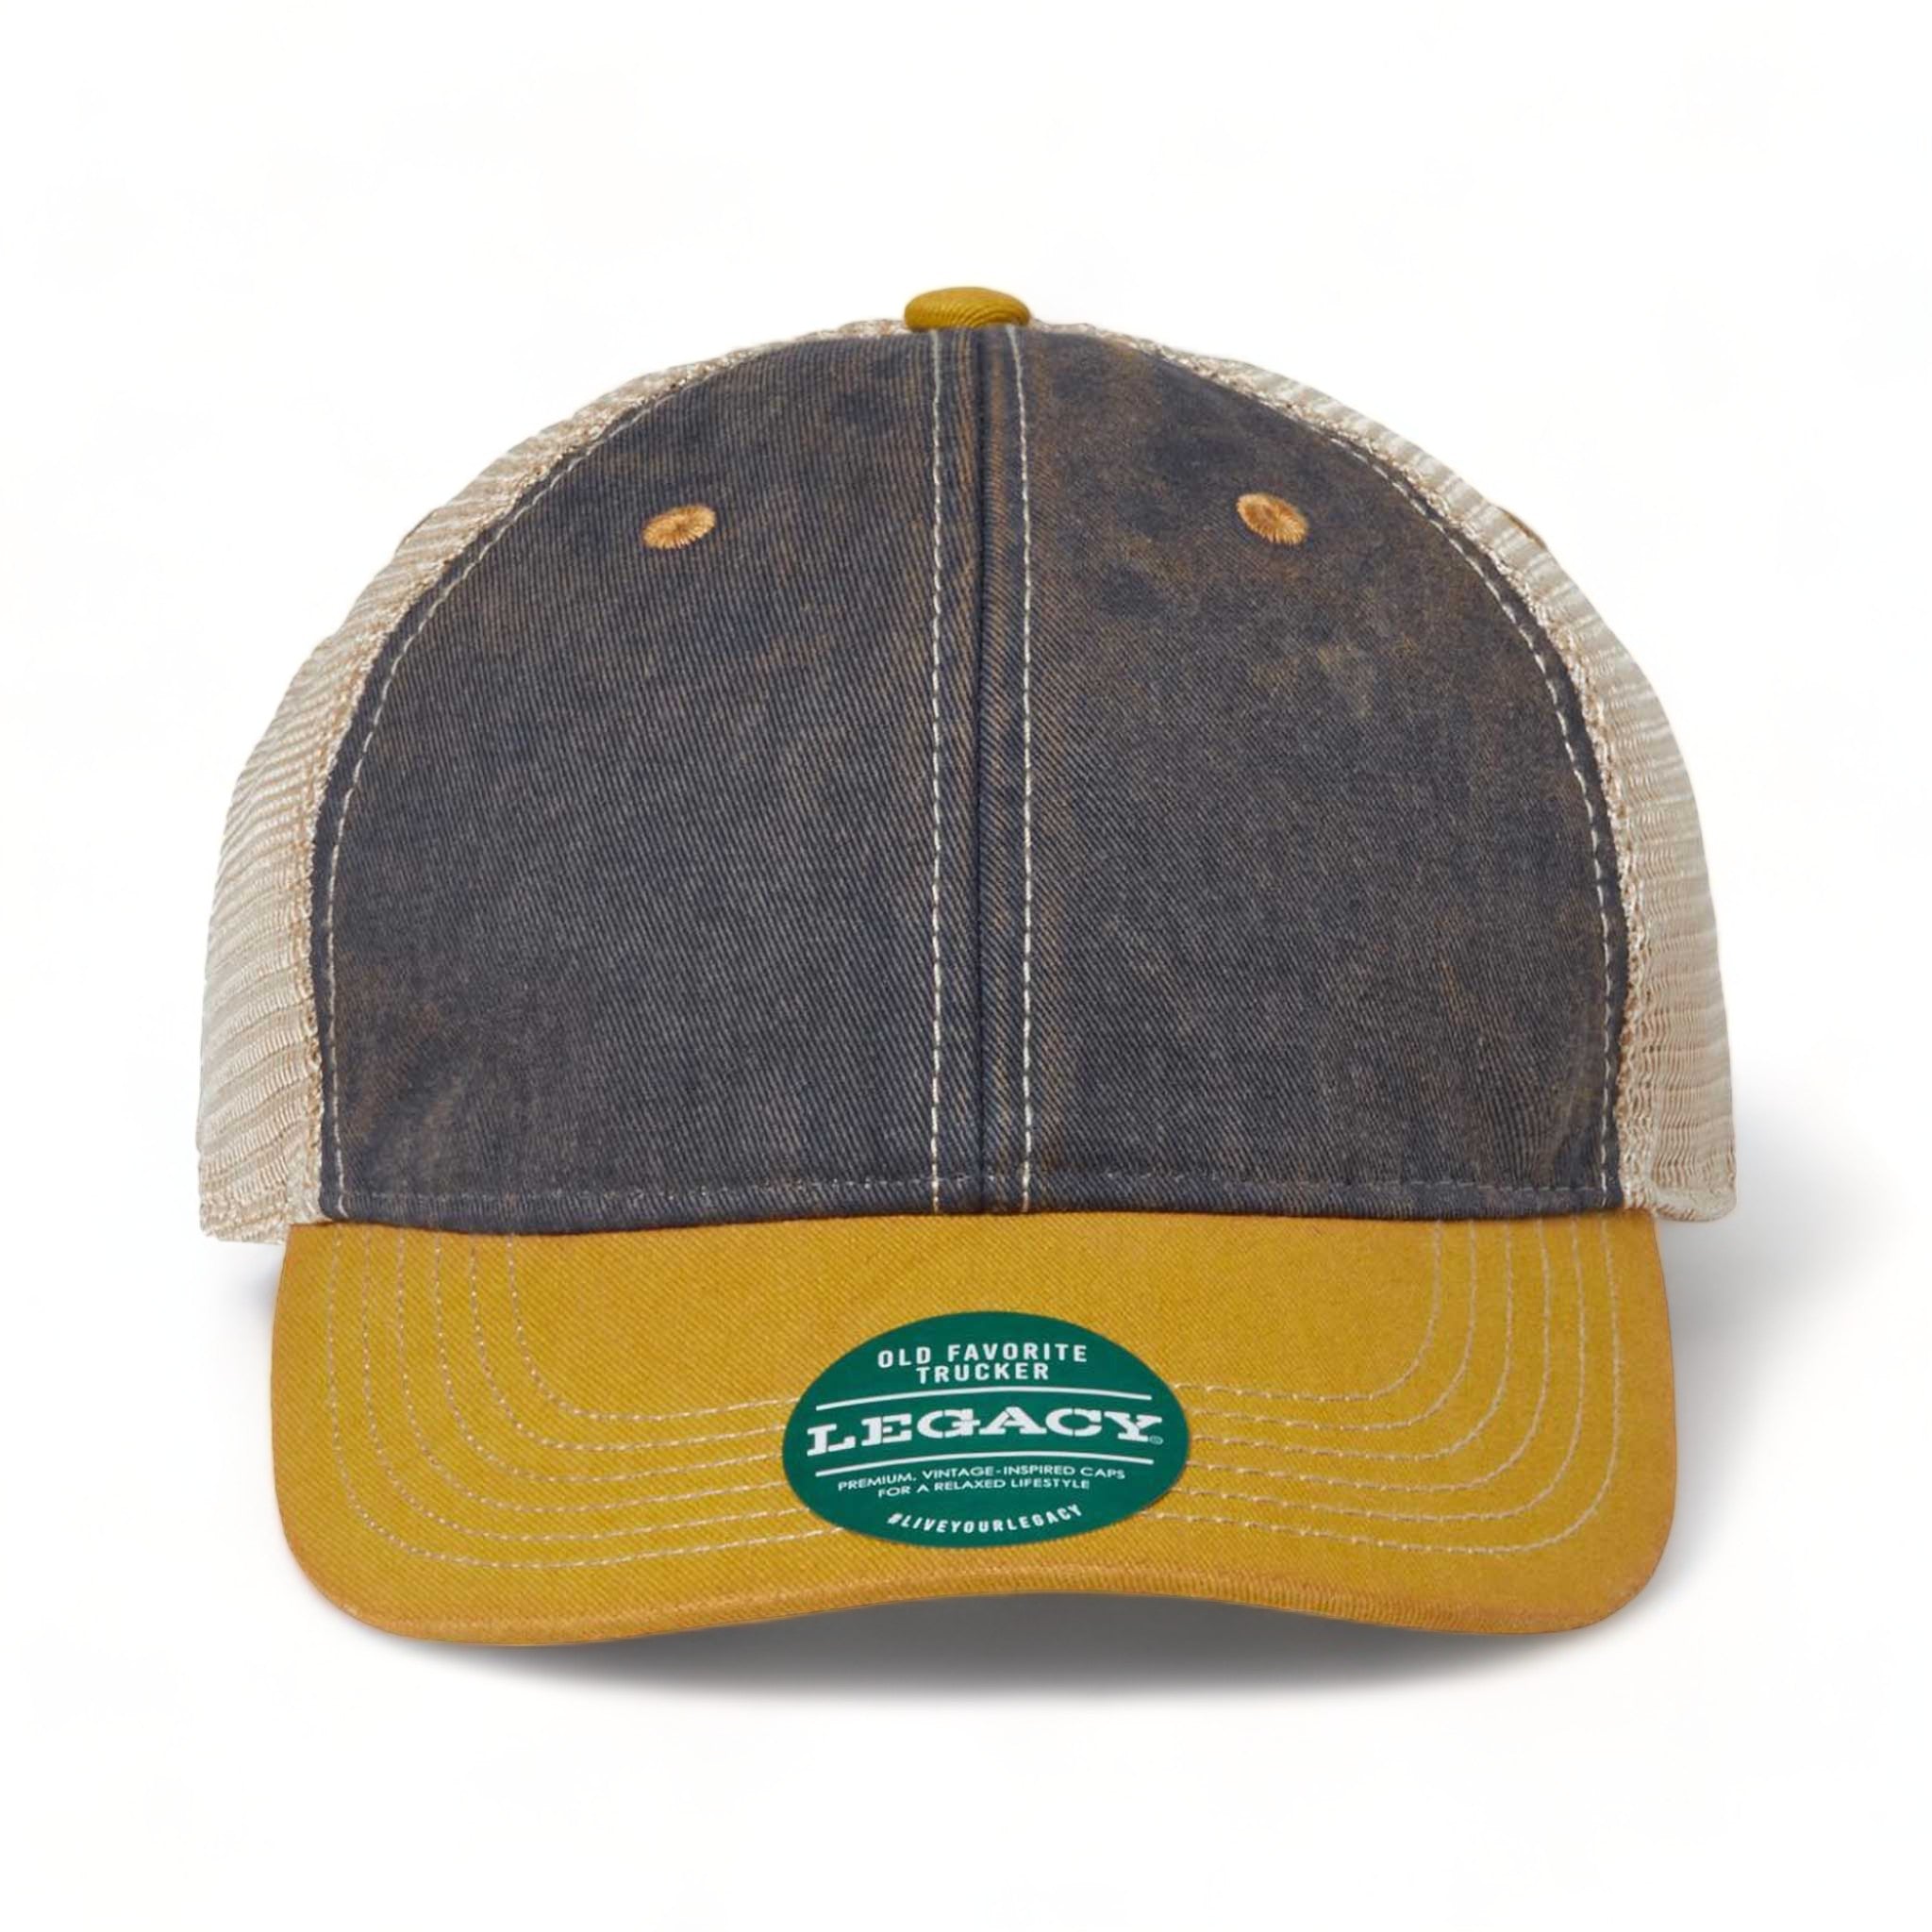 Front view of LEGACY OFA custom hat in navy, yellow and khaki